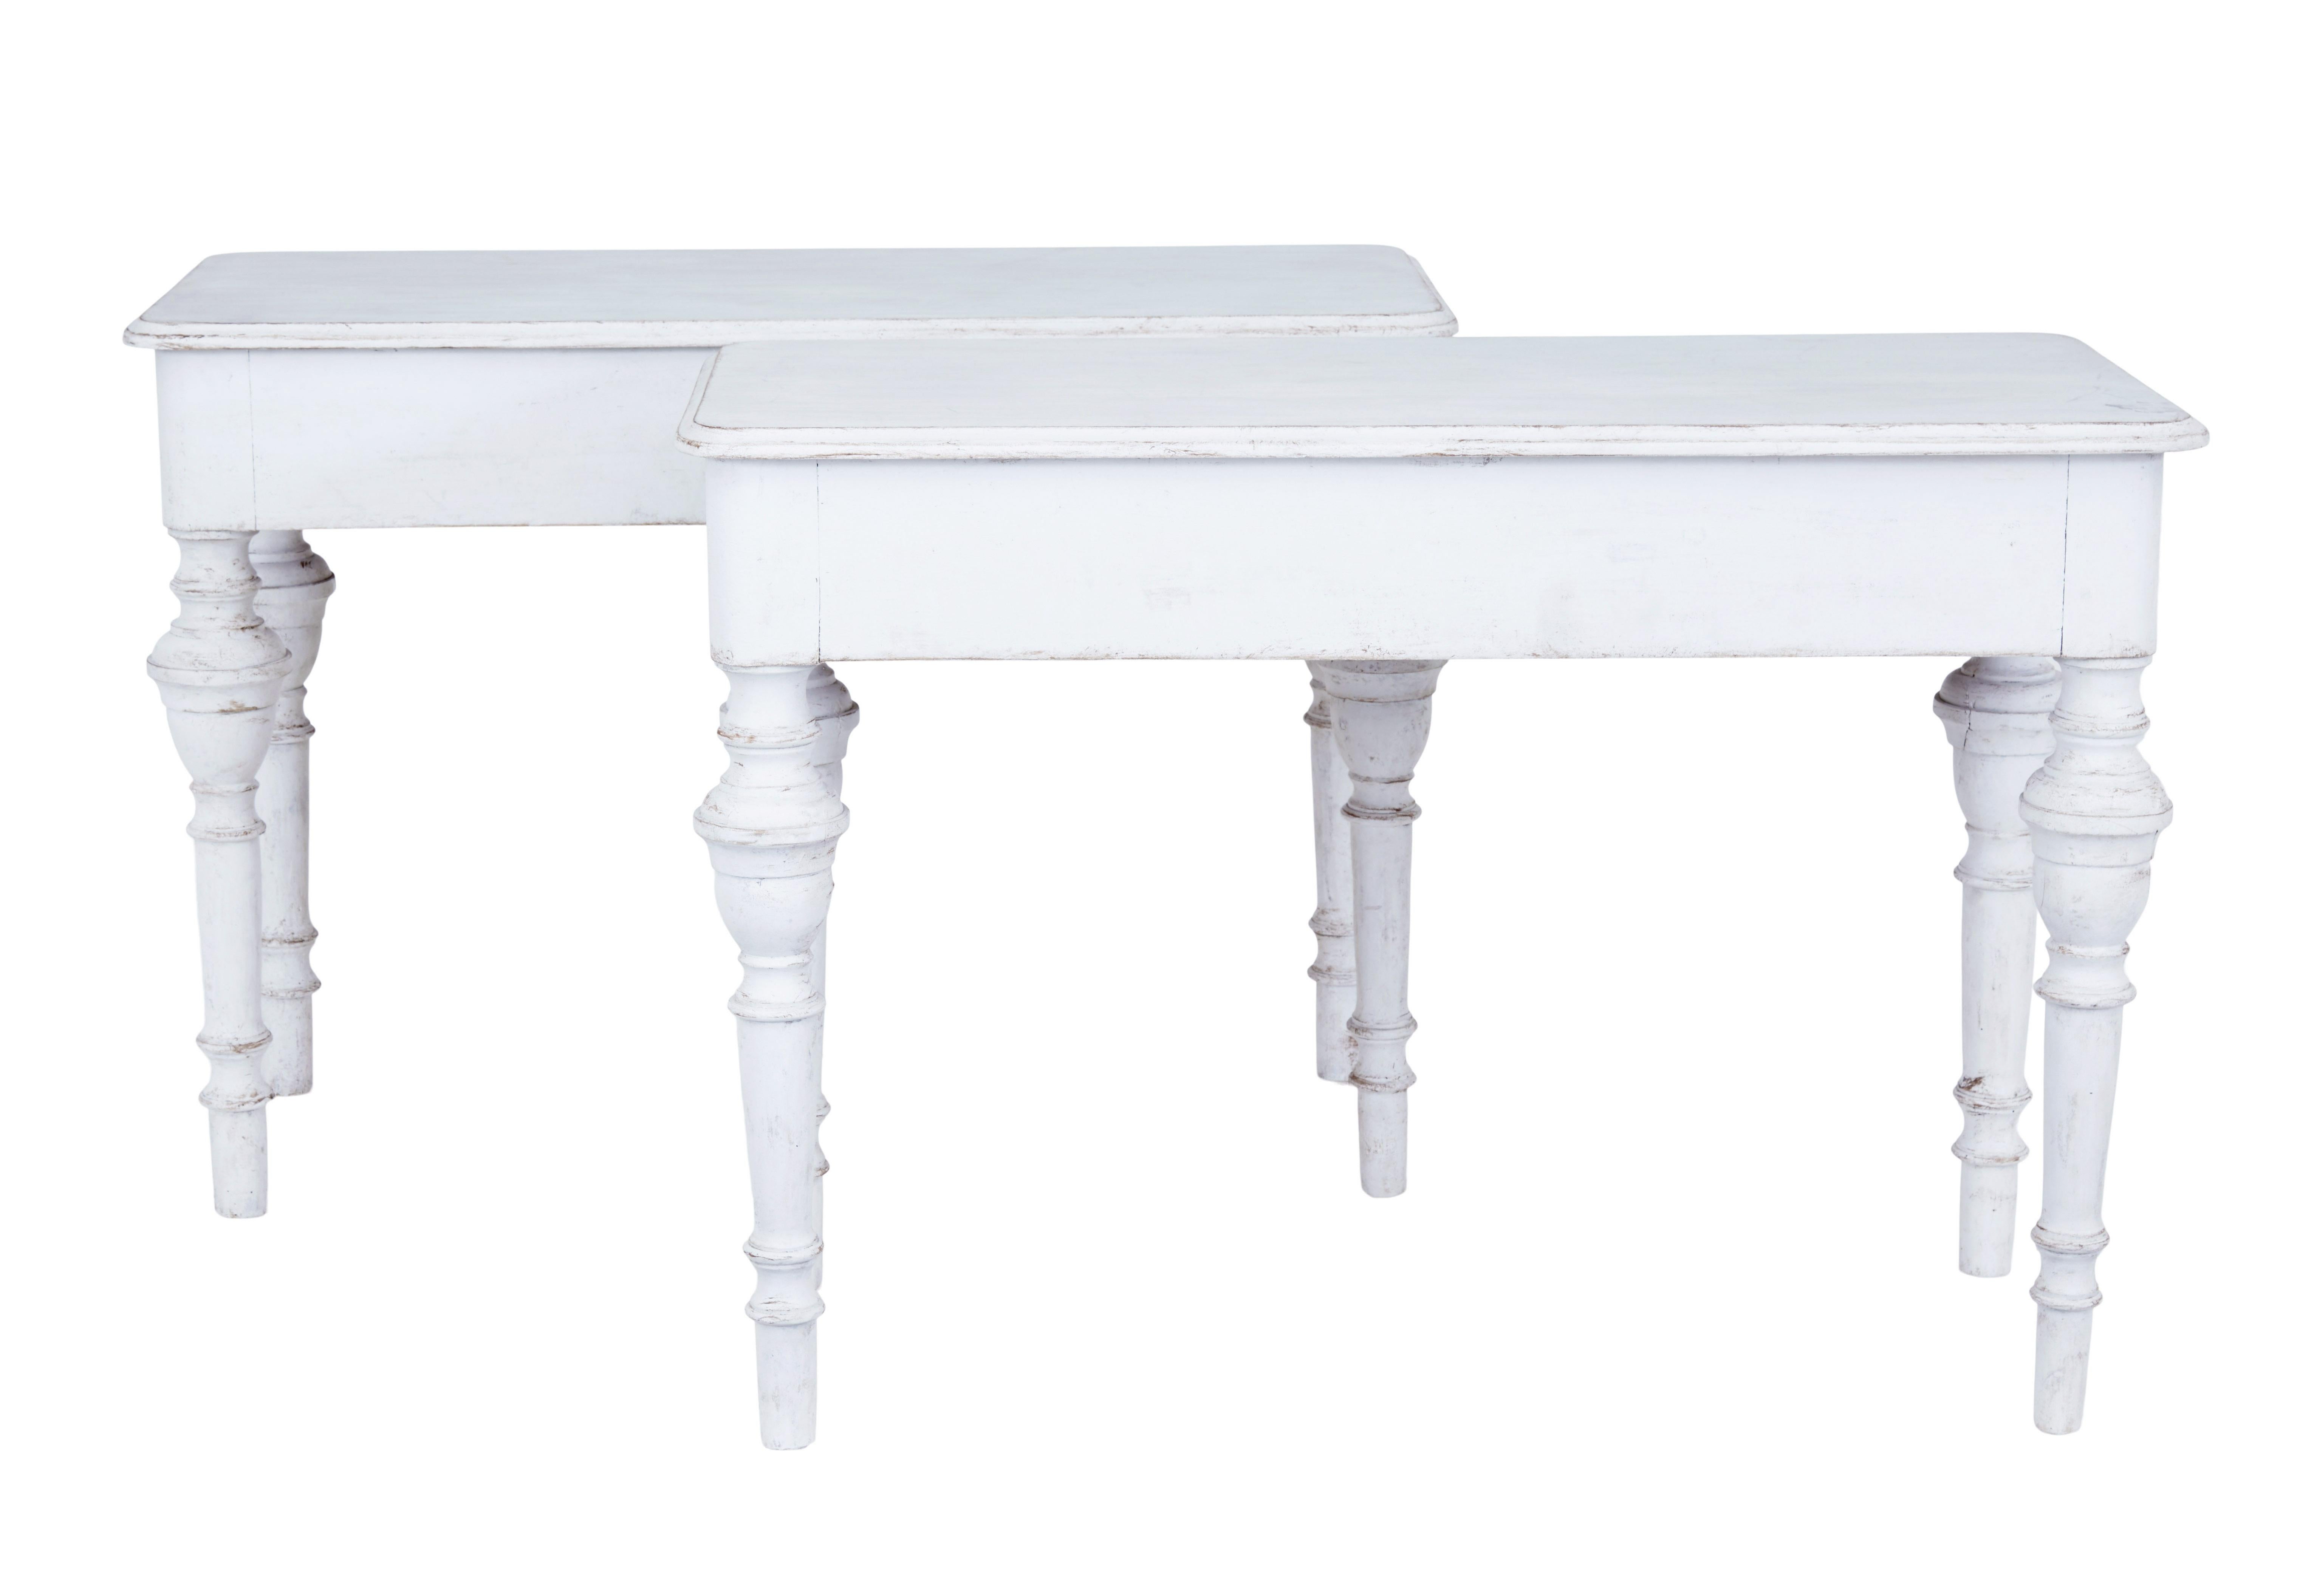 Fine pair of 19th century Swedish painted pine console tables circa 1870.

Simple but elegantly designed pair of console tables with a desirable deep frieze. Rectangular top surface with a bull nosed edge. Each supported by 4 turned